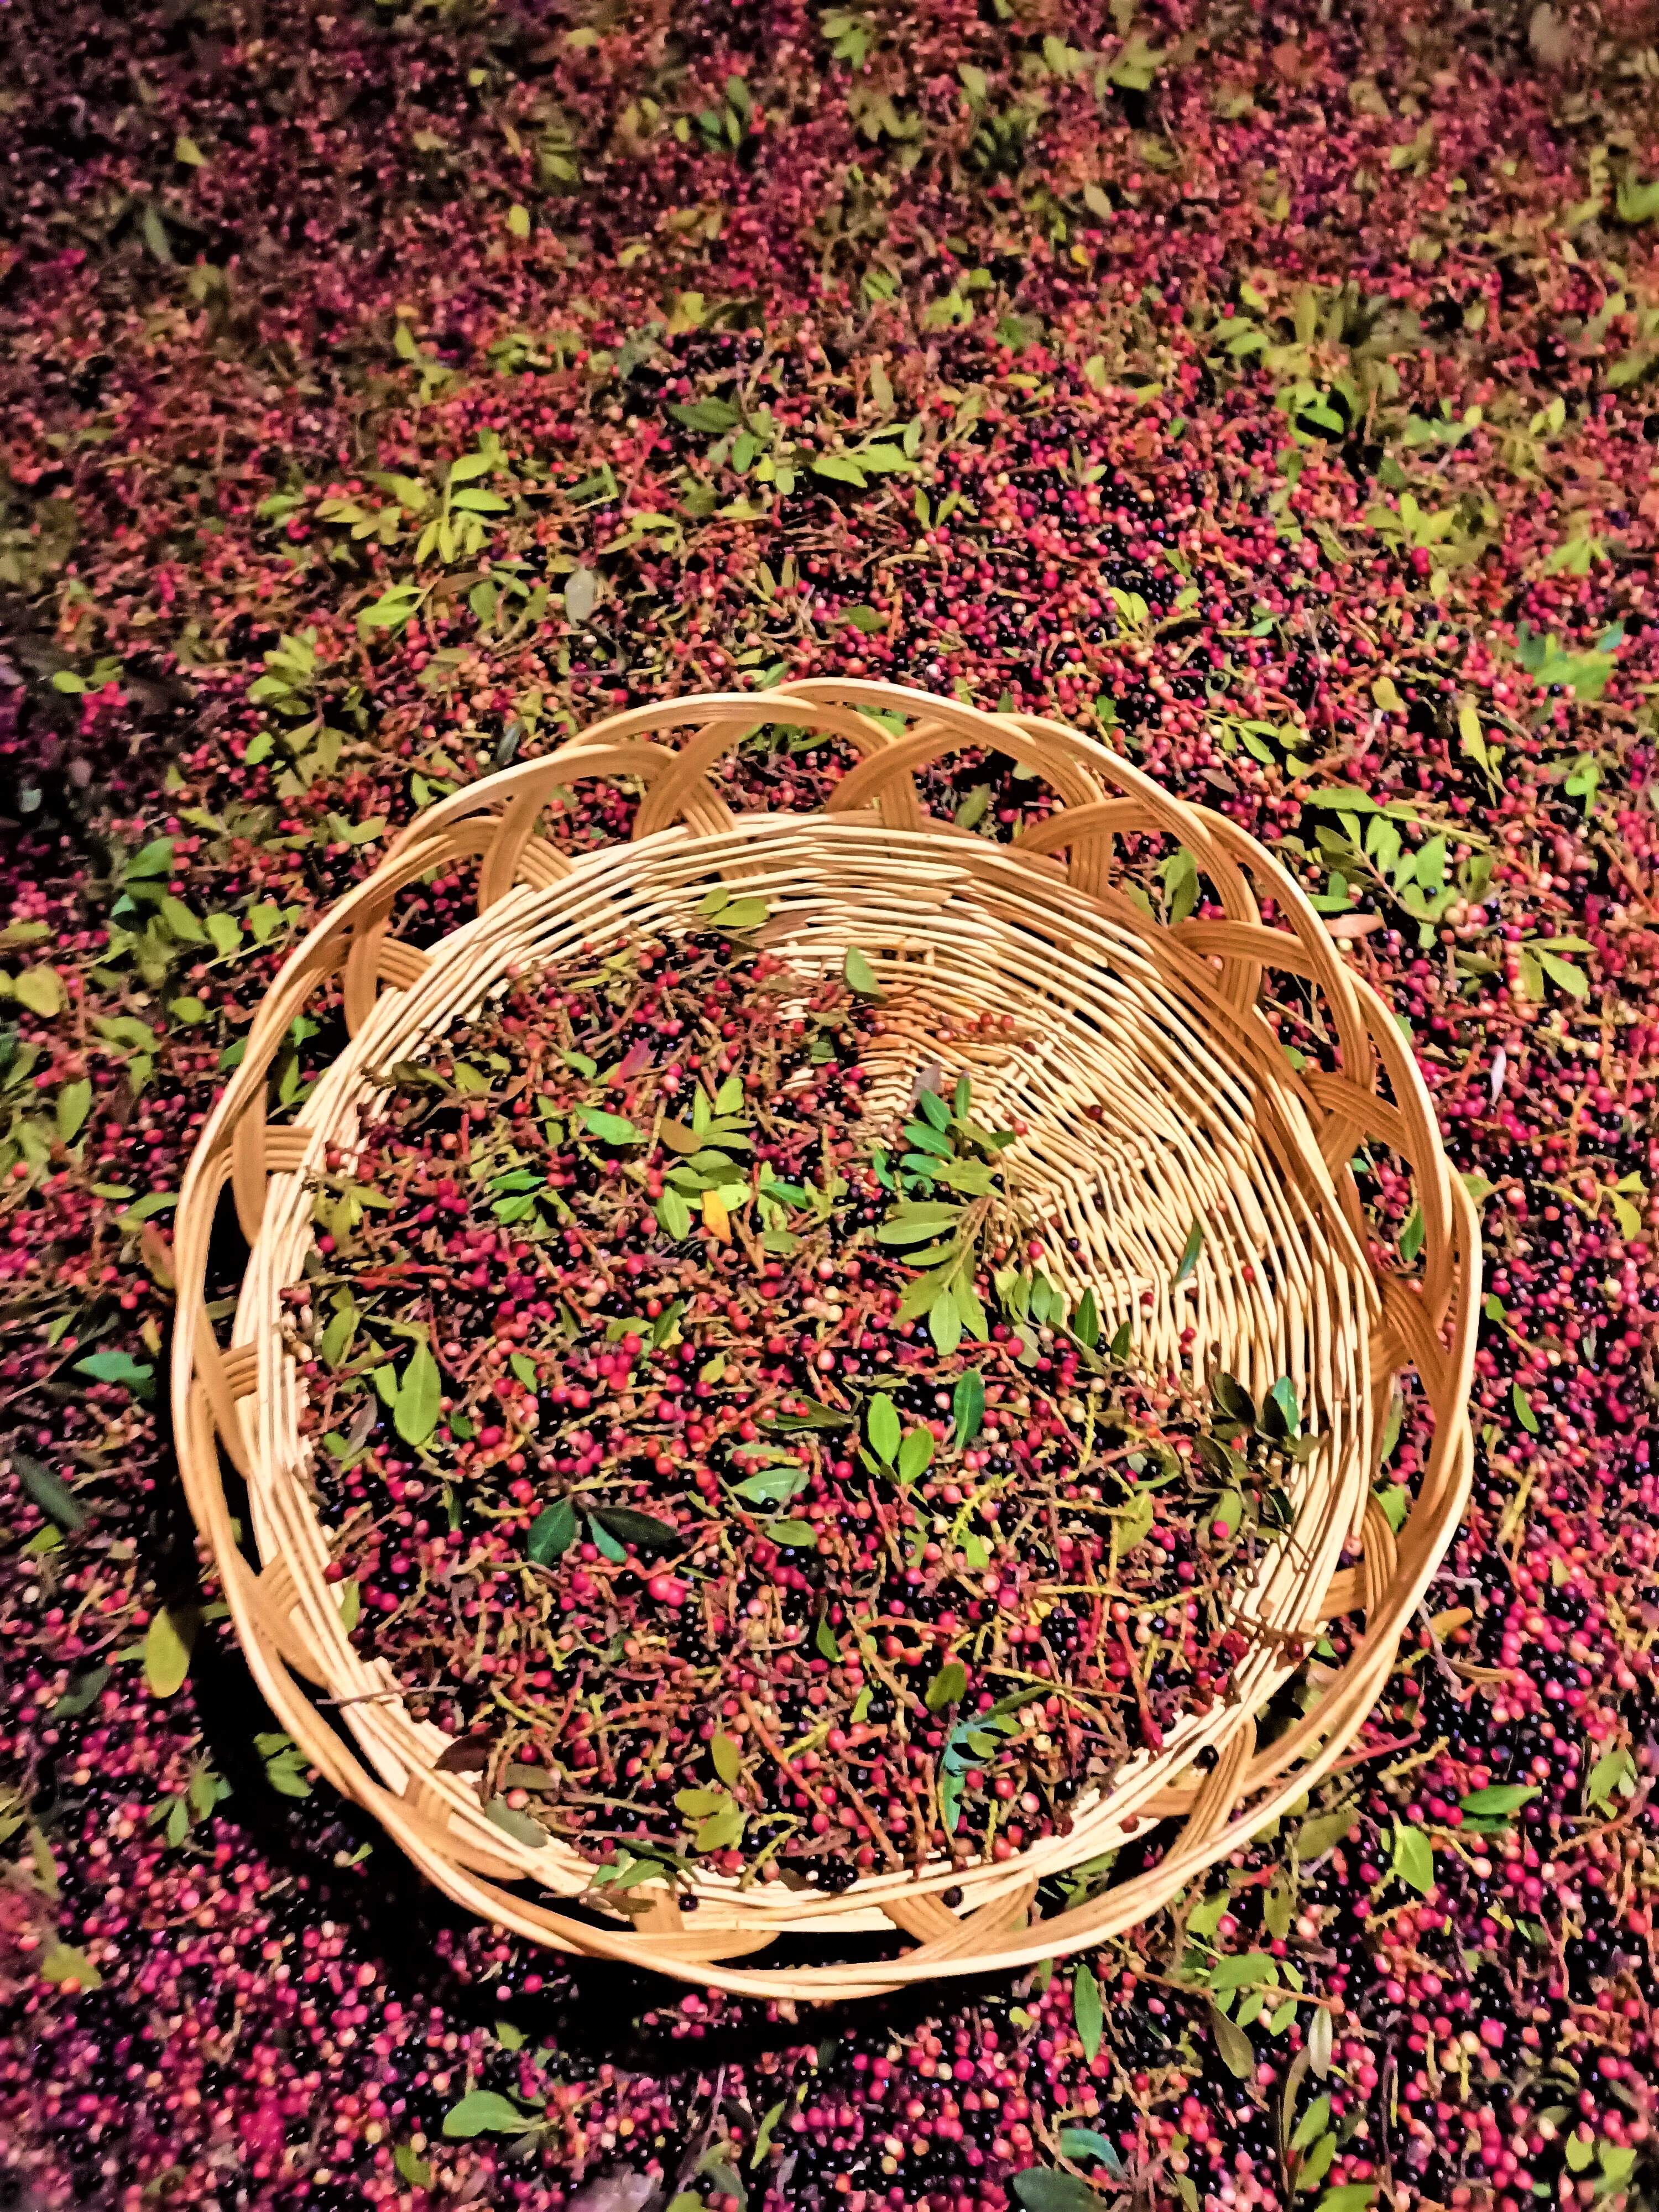 Our baskets are conceived and produced by sardinian artisans.